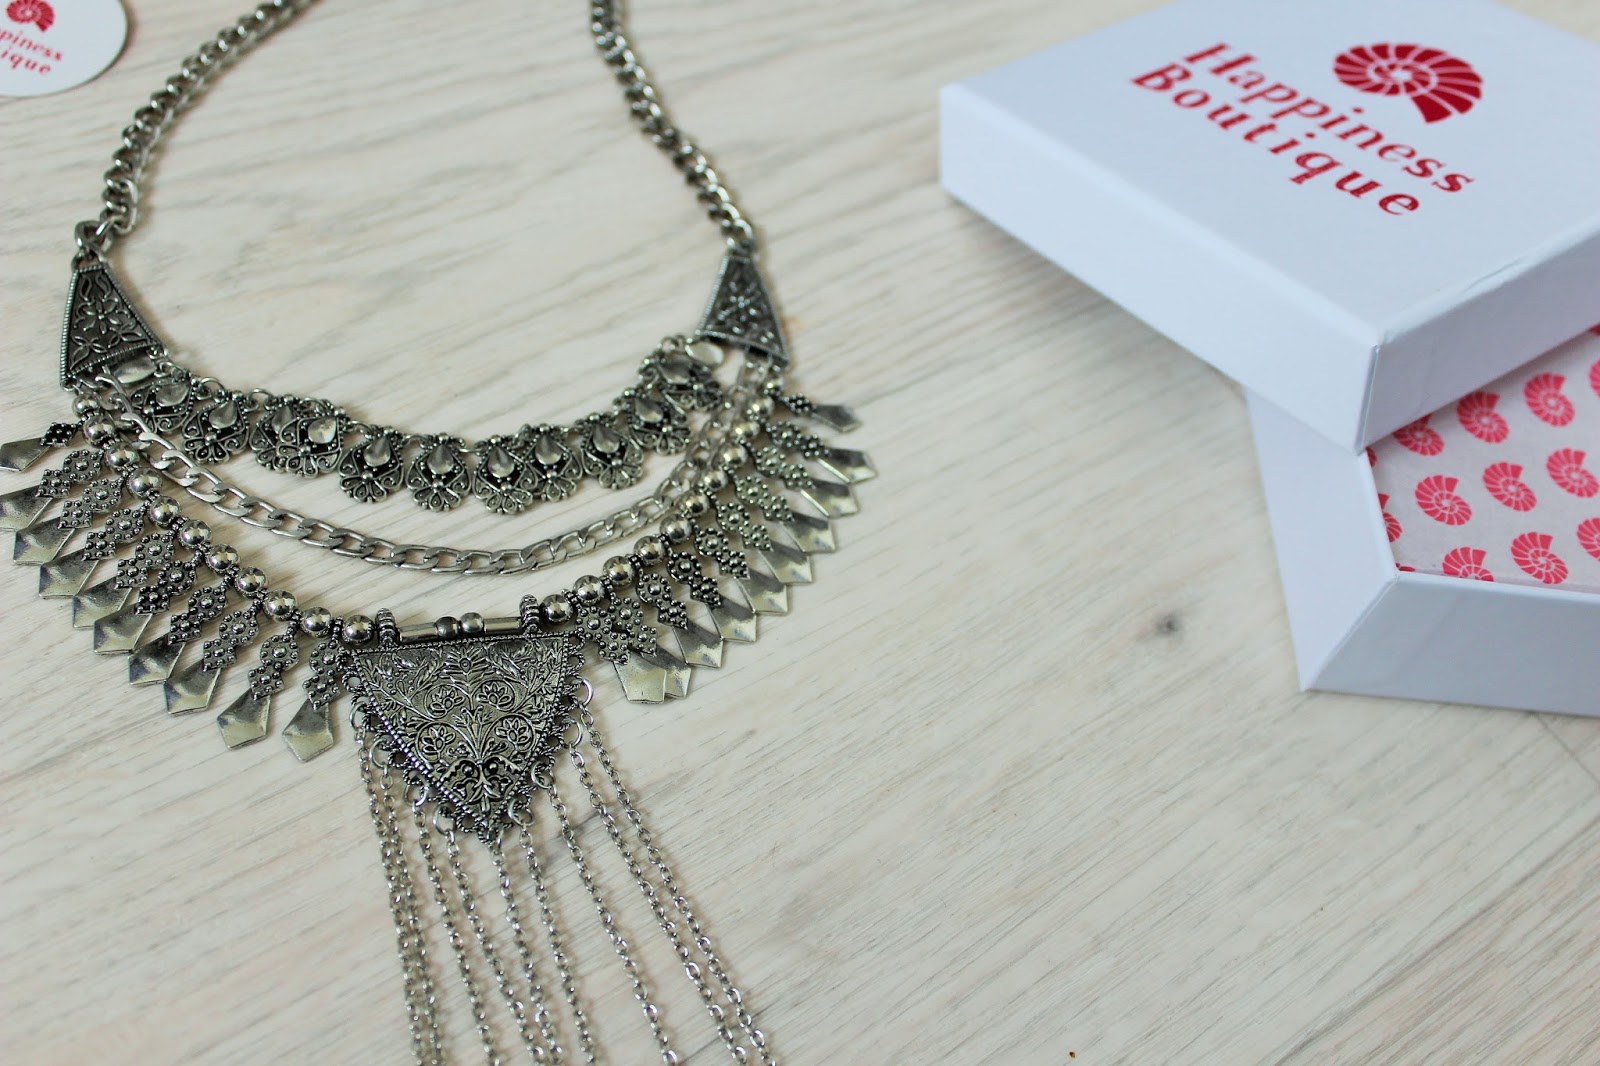 Statement necklace from Happiness Boutique